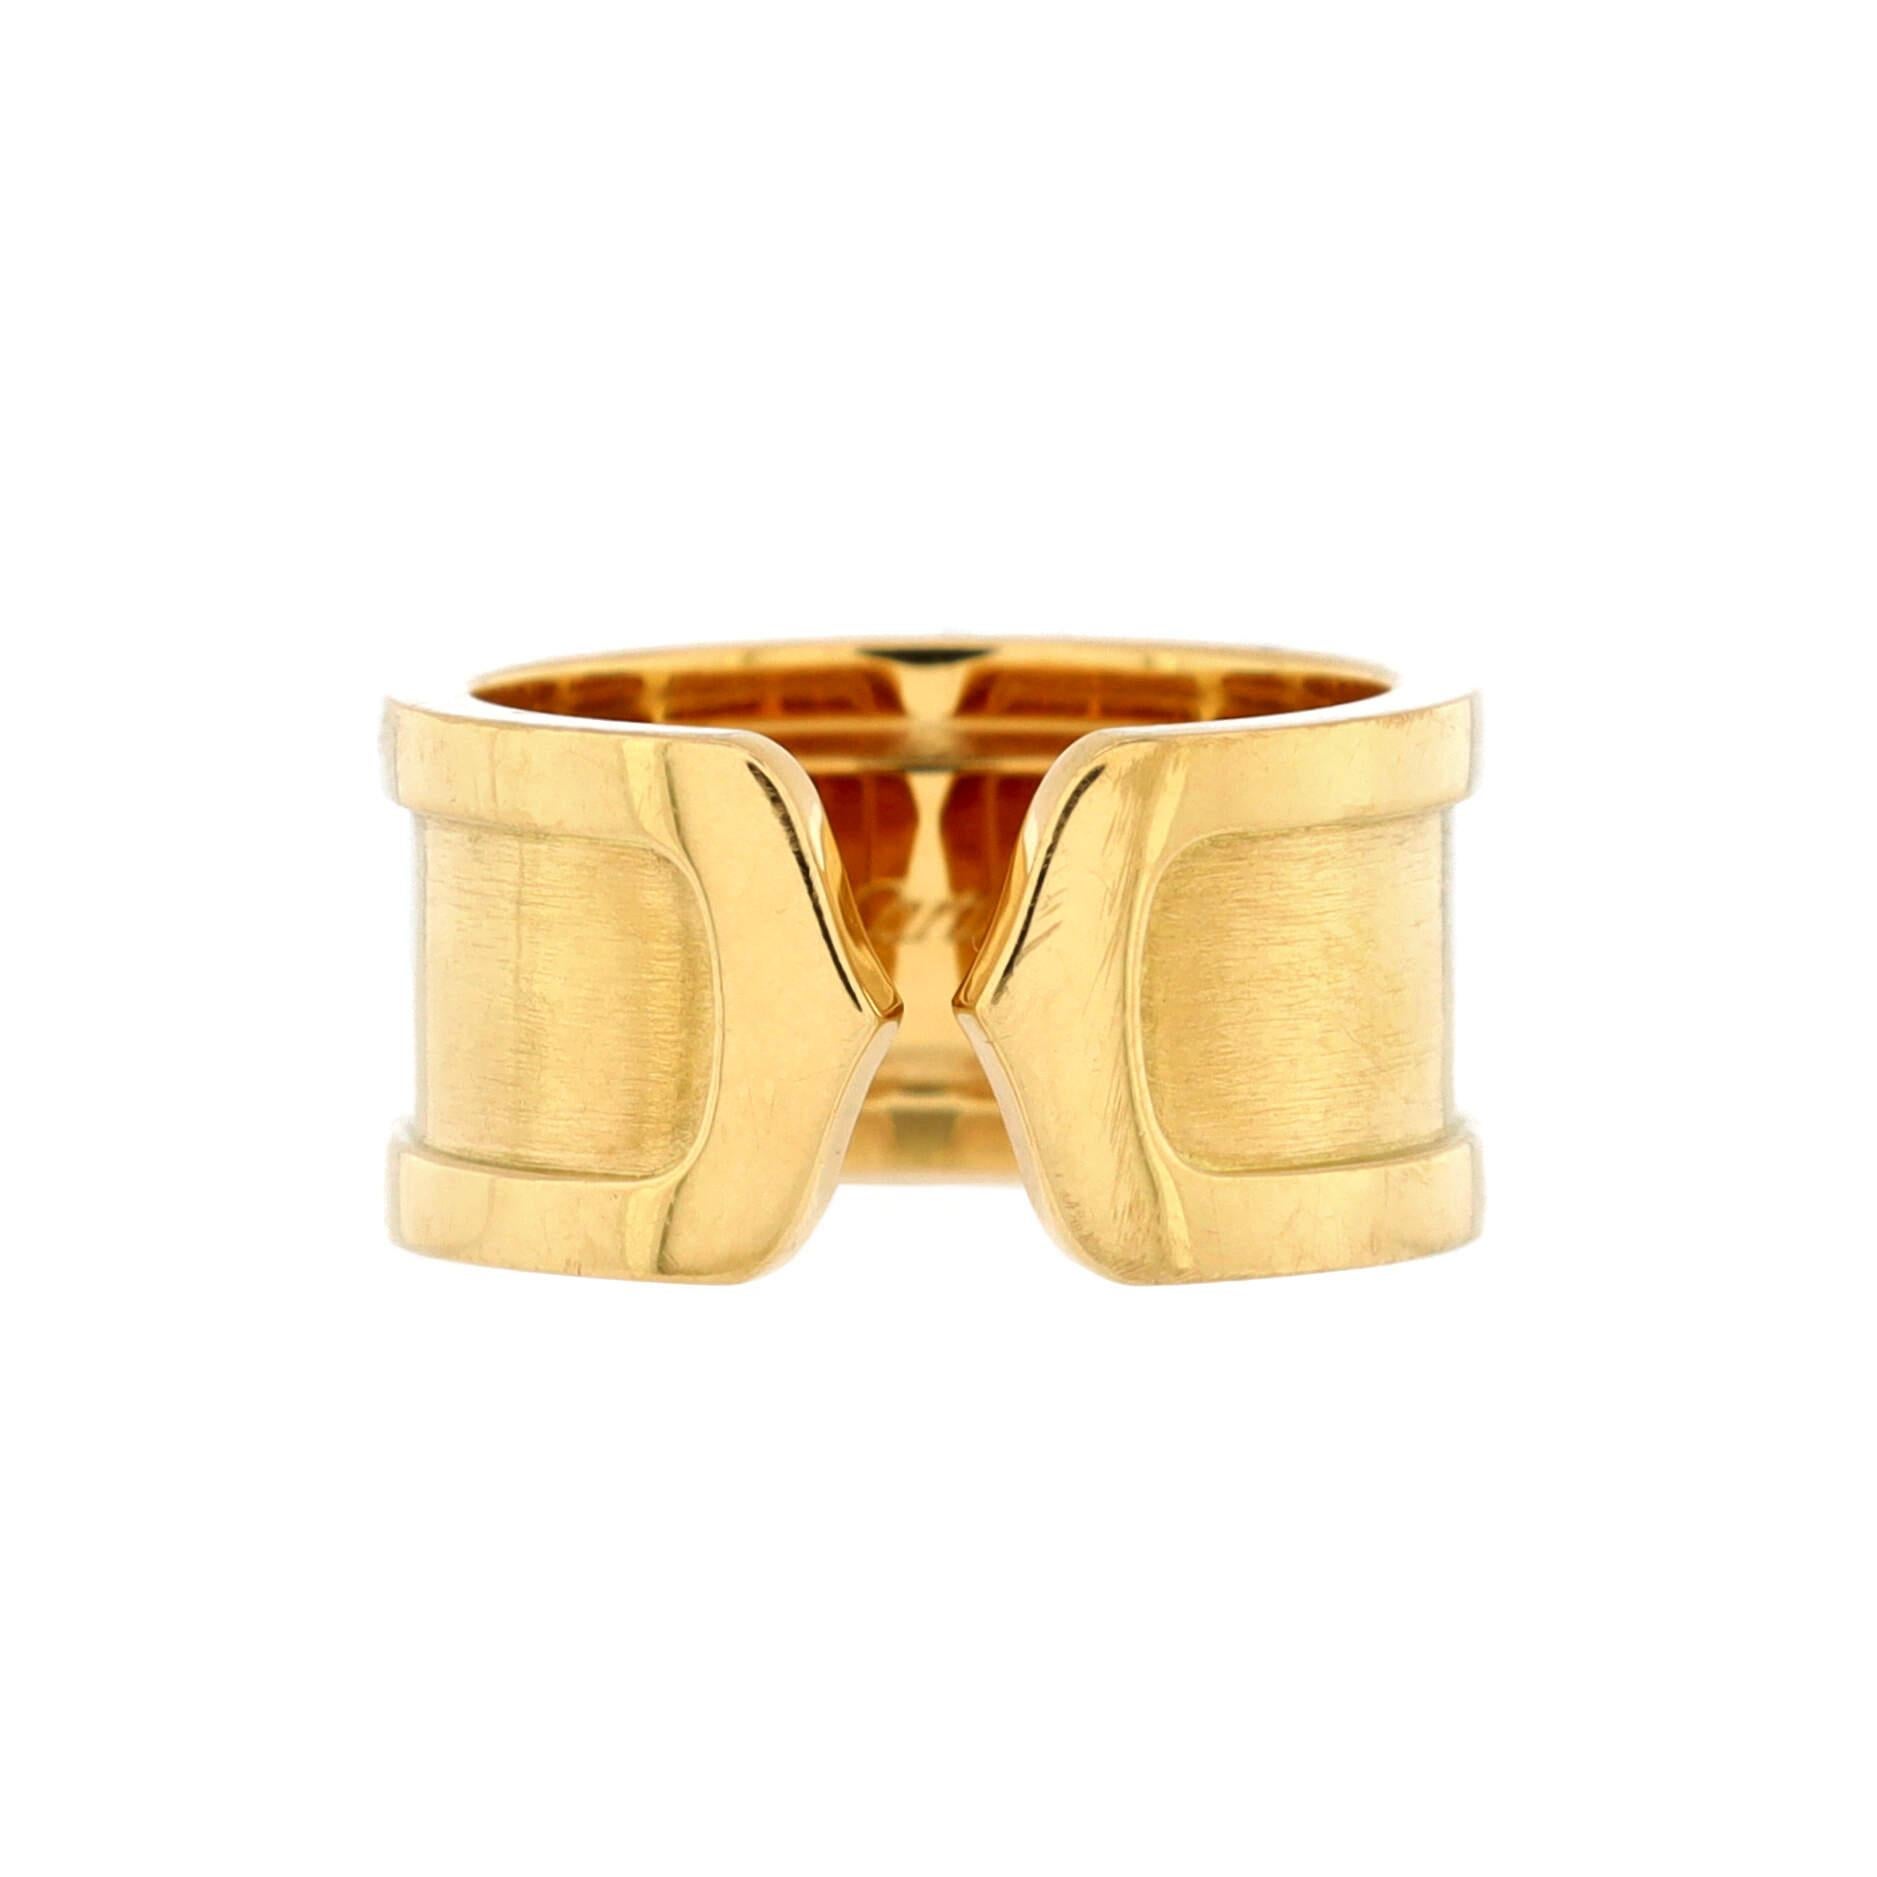 Condition: Good. Moderately heavy wear throughout.
Accessories: No Accessories
Measurements: Size: 5.25 - 50, Width: 10 mm
Designer: Cartier
Model: C de Cartier Ring 18K Yellow Gold 10mm
Exterior Color: Yellow Gold
Item Number: 224640/10